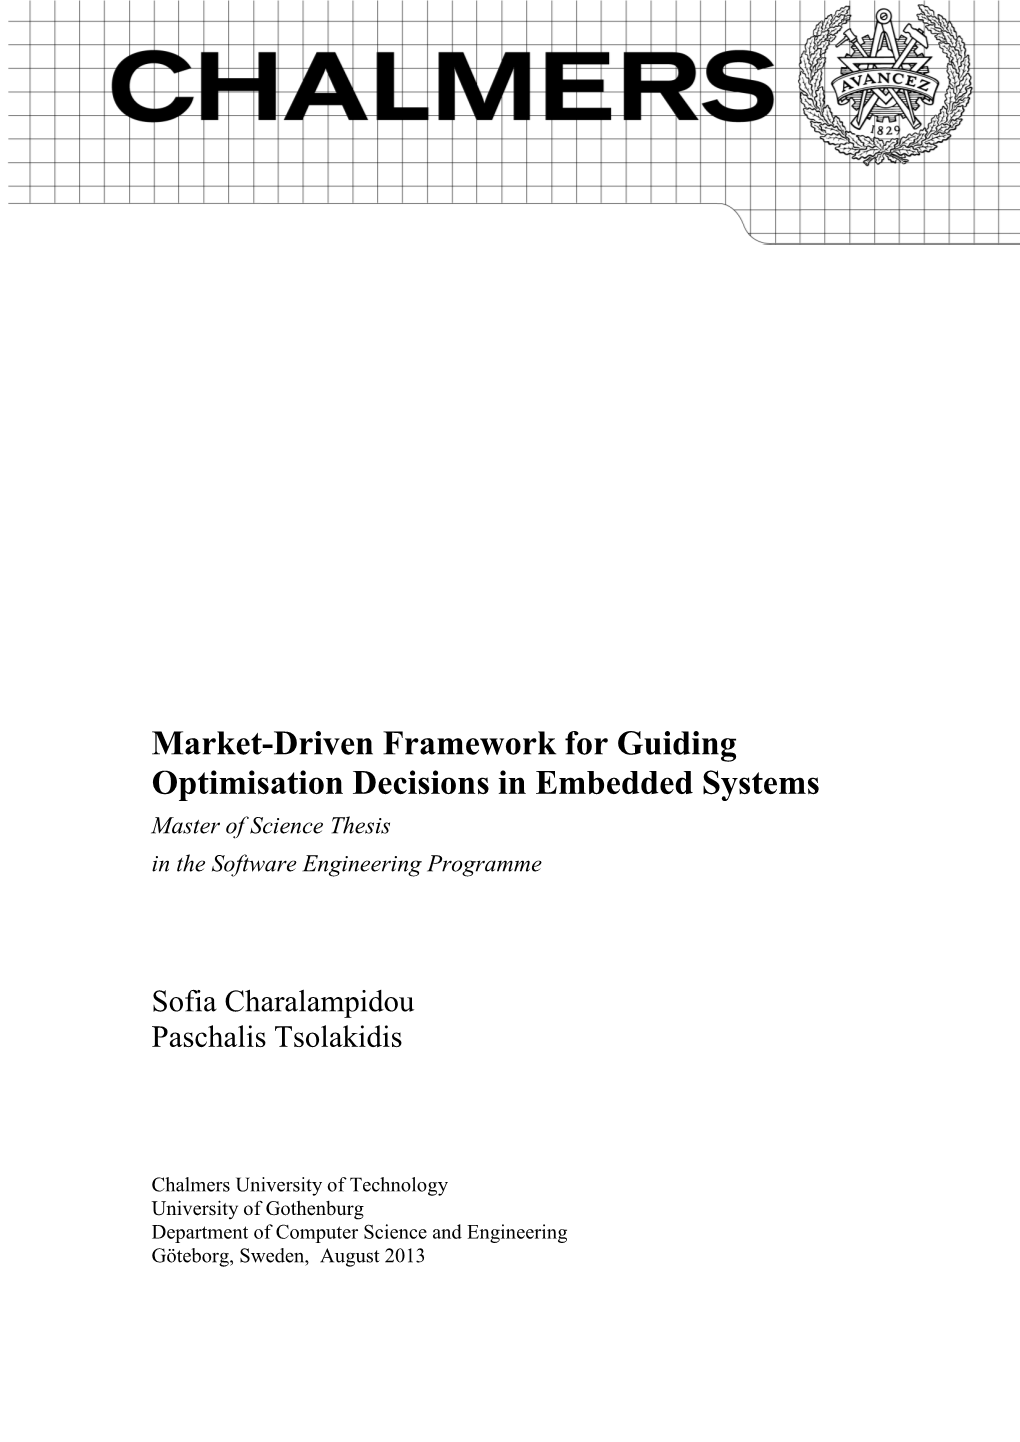 Market-Driven Framework for Guiding Optimisation Decisions in Embedded Systems Master of Science Thesis in the Software Engineering Programme